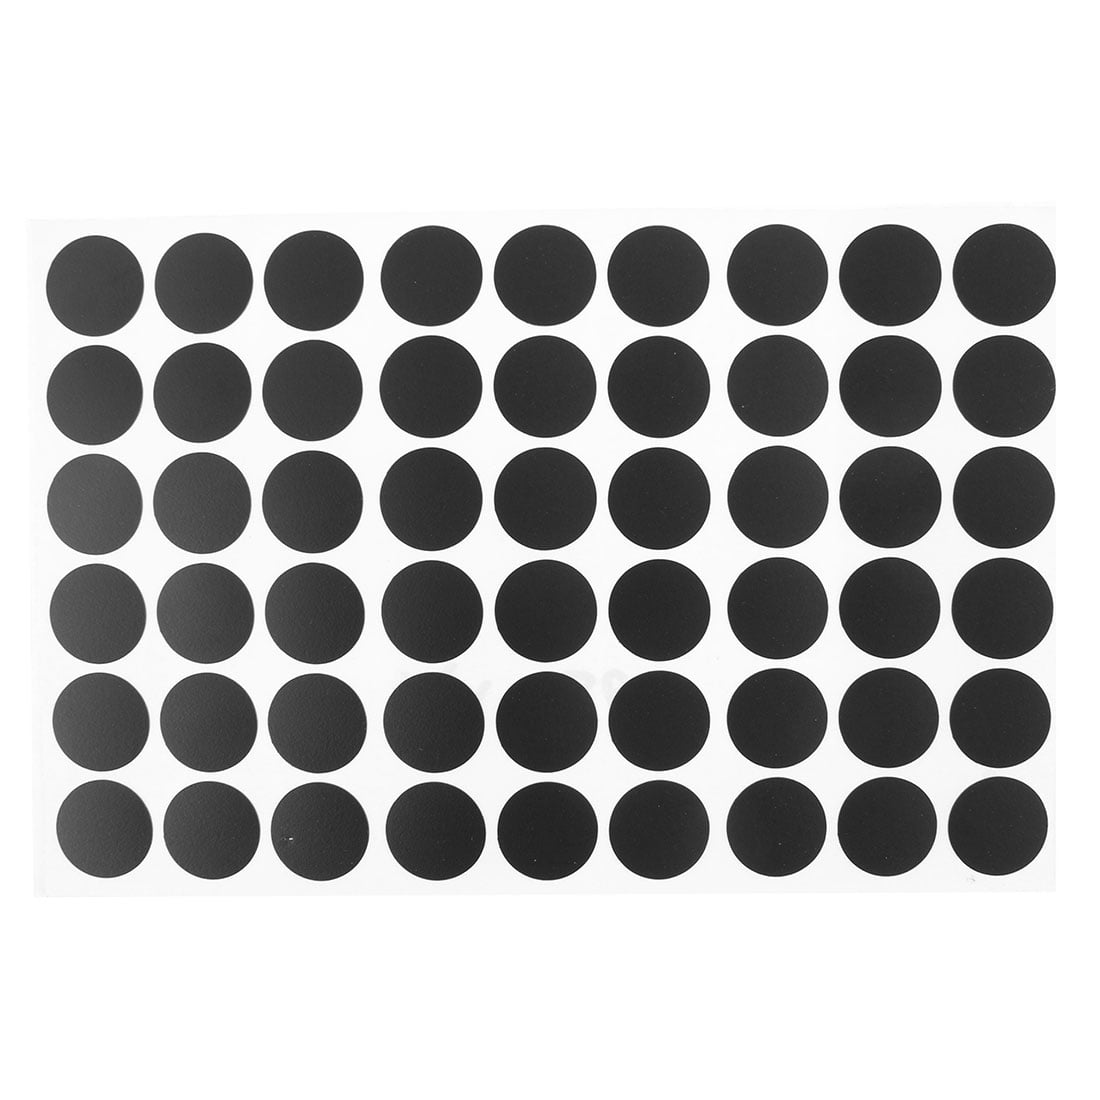 162 Pcs Screw Hole Stickers 21mm Self-Adhesive White Screw Hole Caps Covers Dustproof Cabinet Sticker for Wood Furniture Cabinet Shelve Black, 3 Sheets//54 in 1